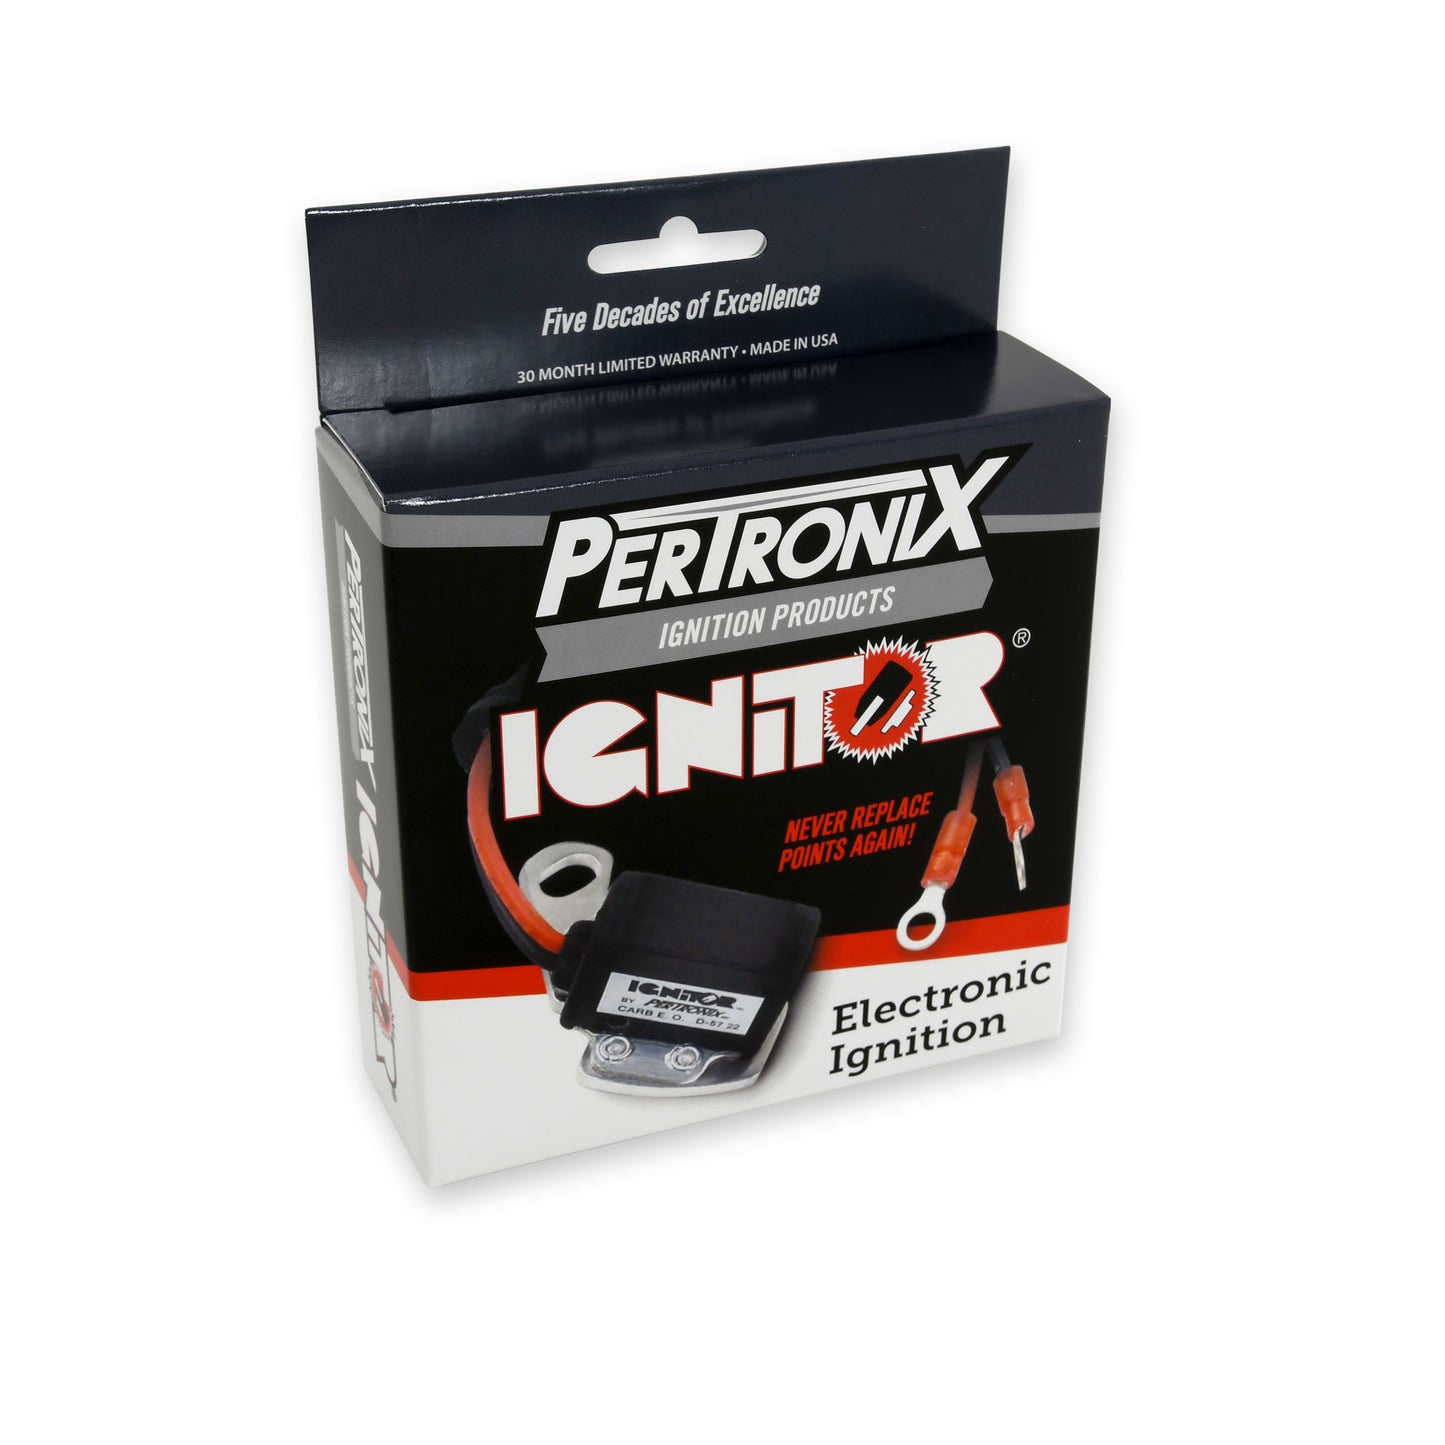 PerTronix Ignitor Electronic Ignition Conversion Kit for Delco Distributors-1122-package